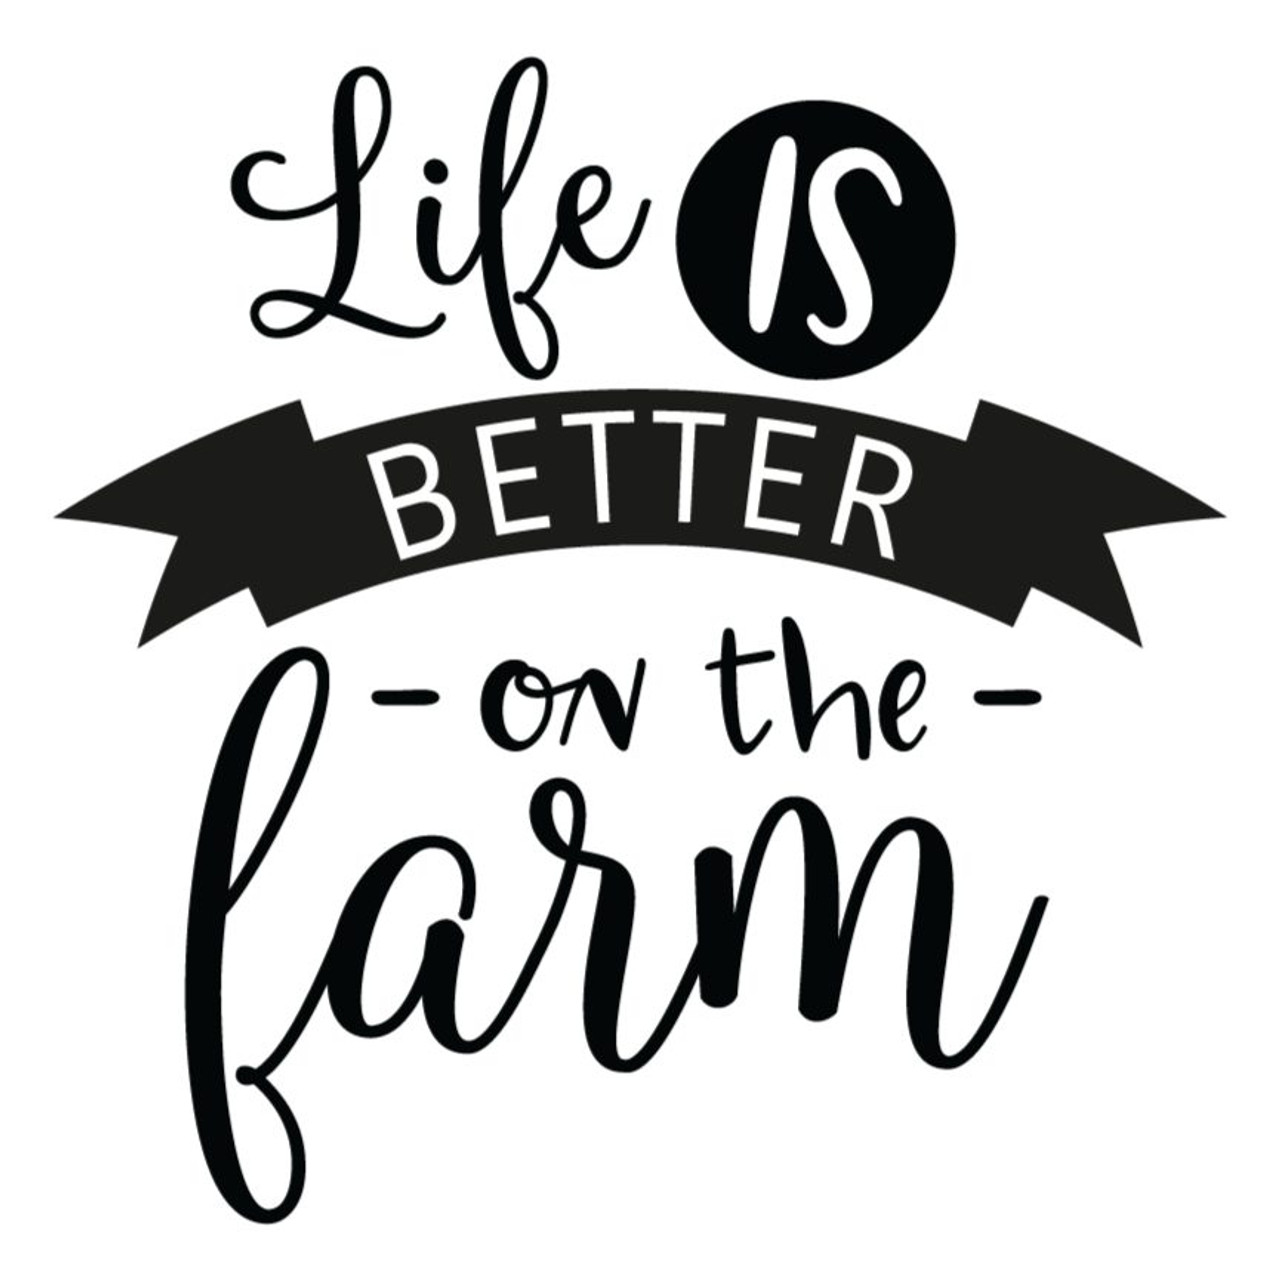 Download Life Is Better On The Farm Svg Svg Eps Png Dxf Cut Files For Cricut And Silhouette Cameo By Savanasdesign